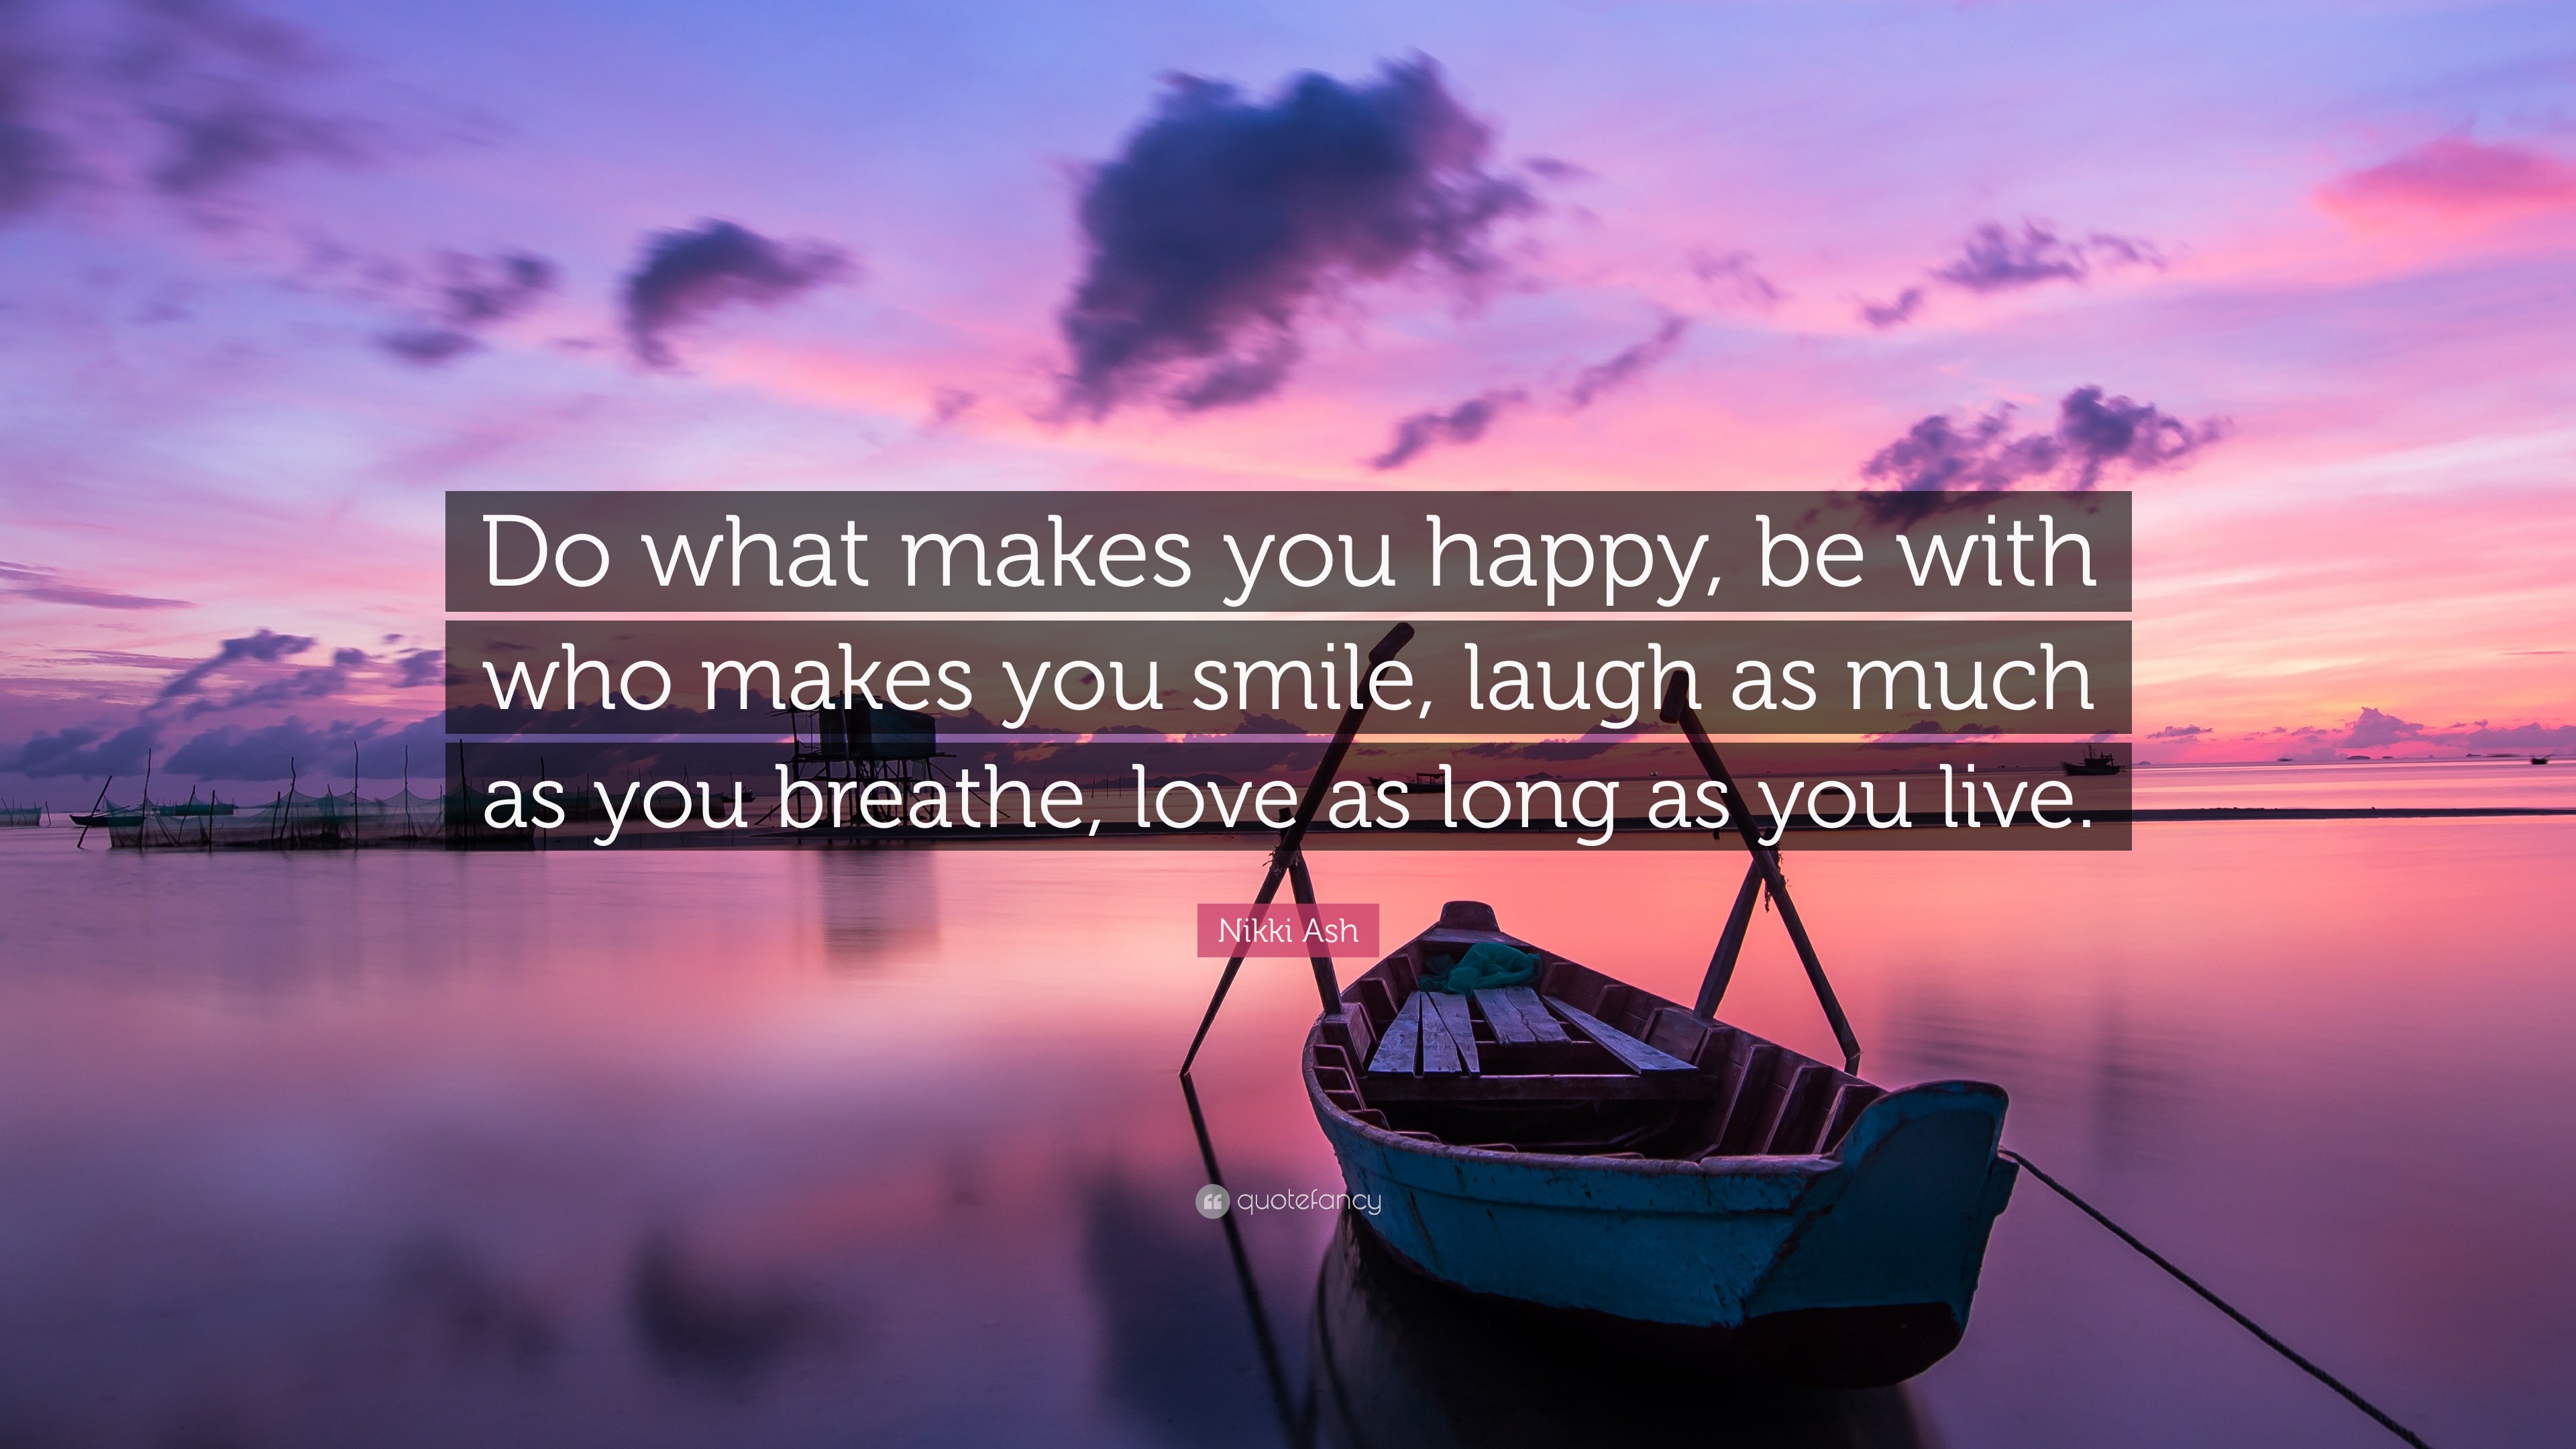 quotes to make you smile and laugh